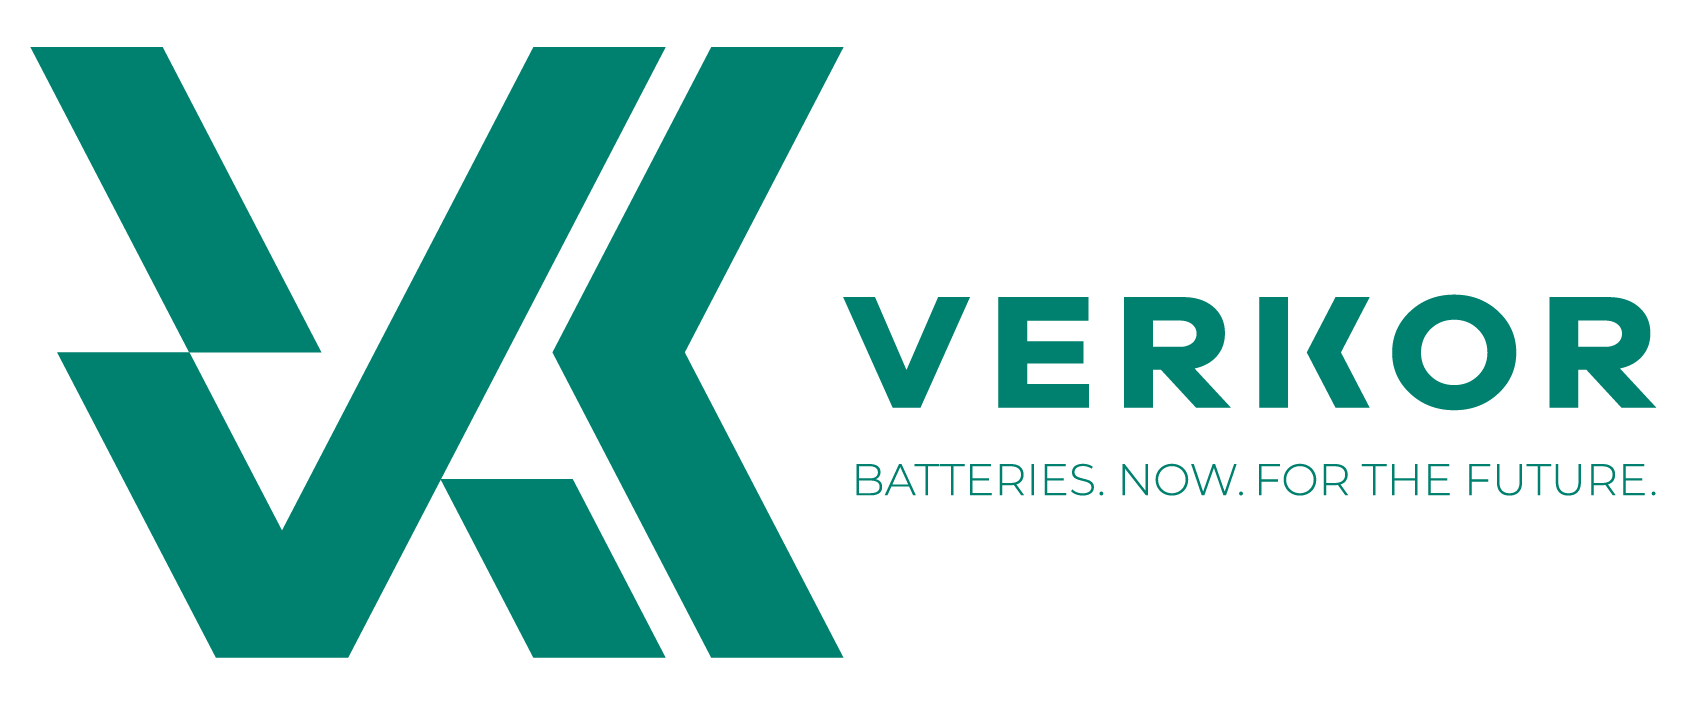 Battery-cell manufacturer for southern Europe